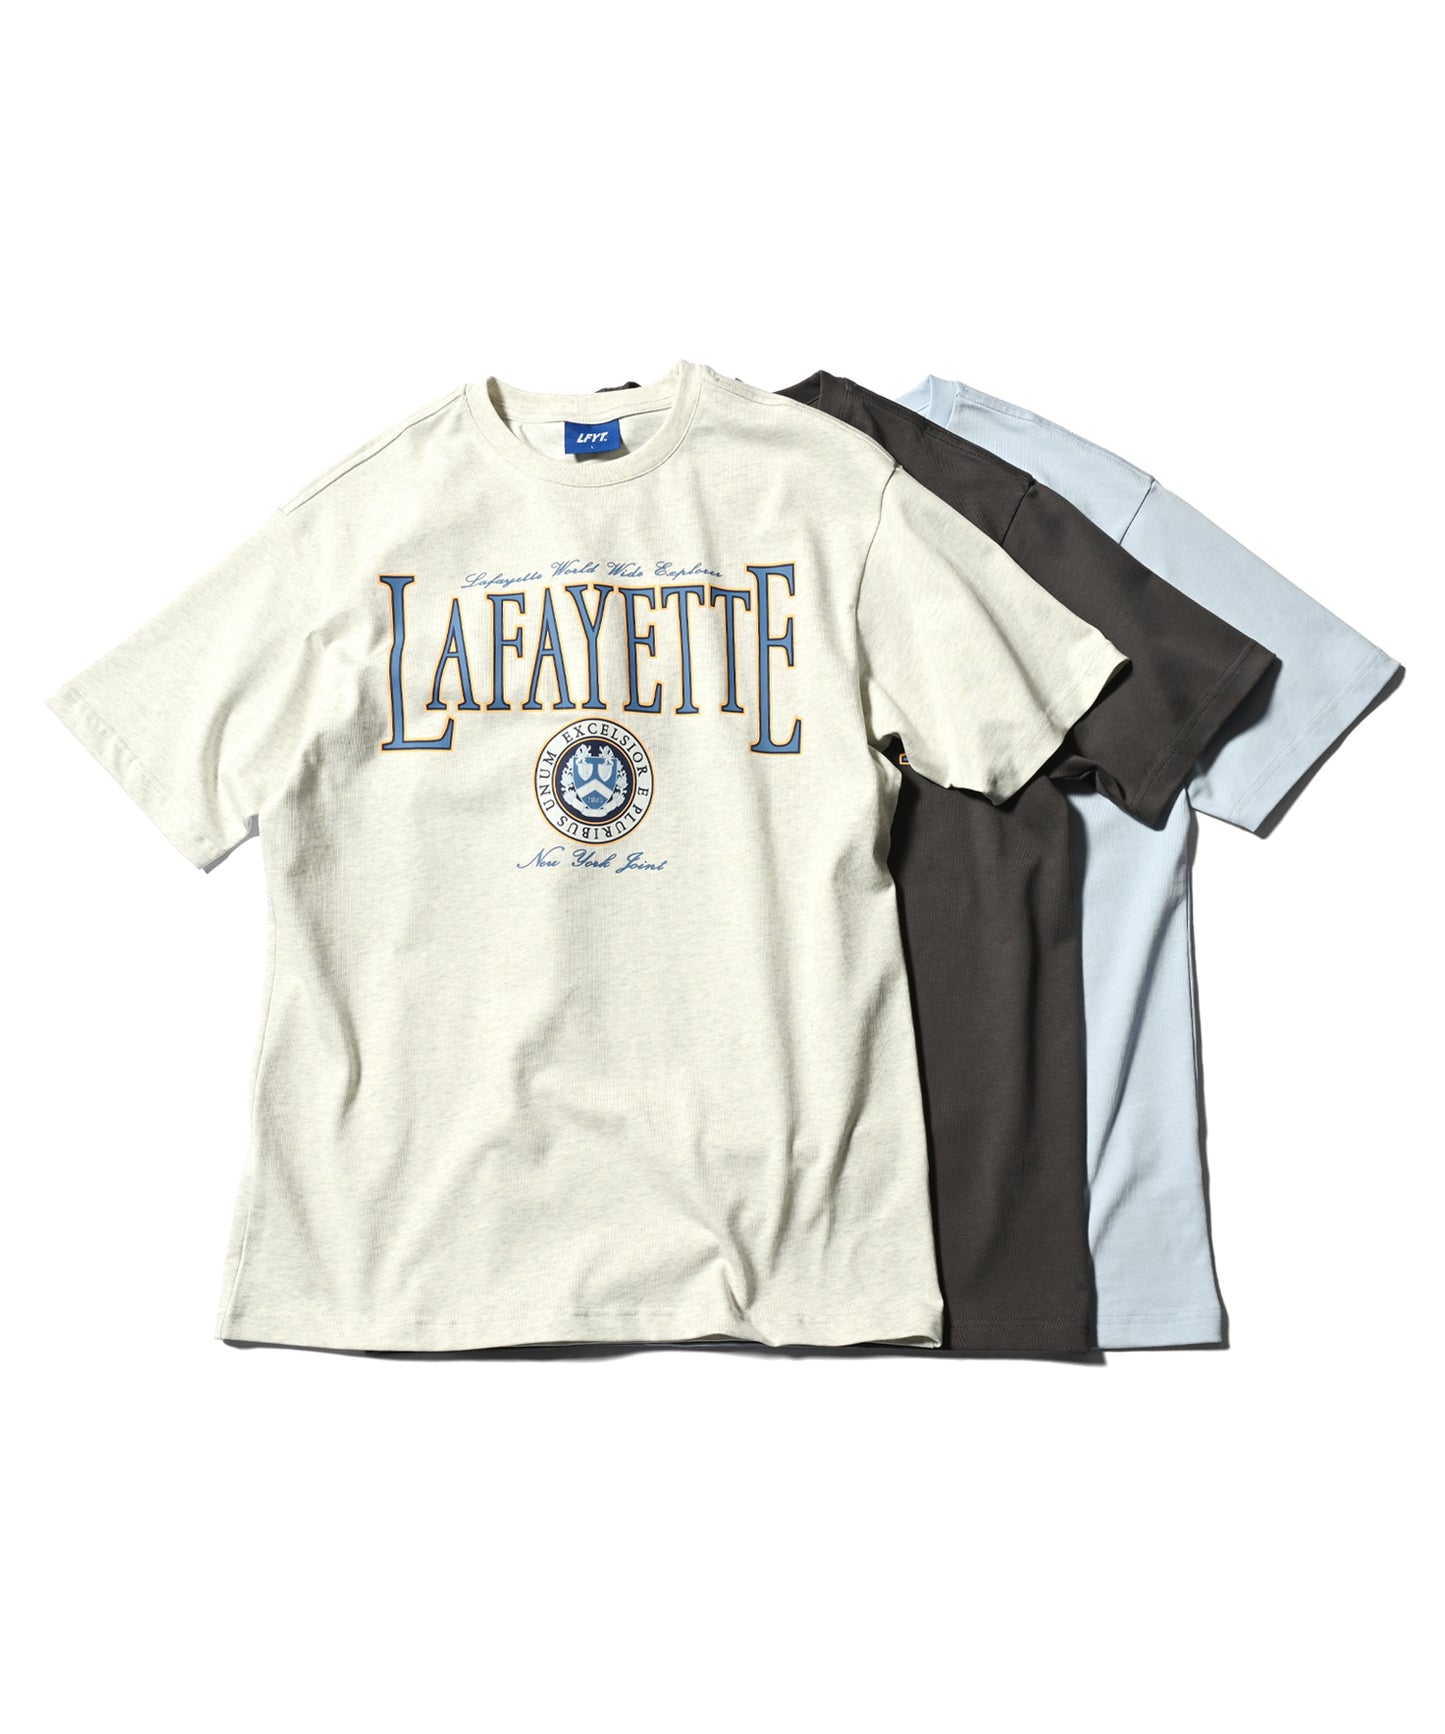 LFYT Lafayette Coat Of Arms Tee